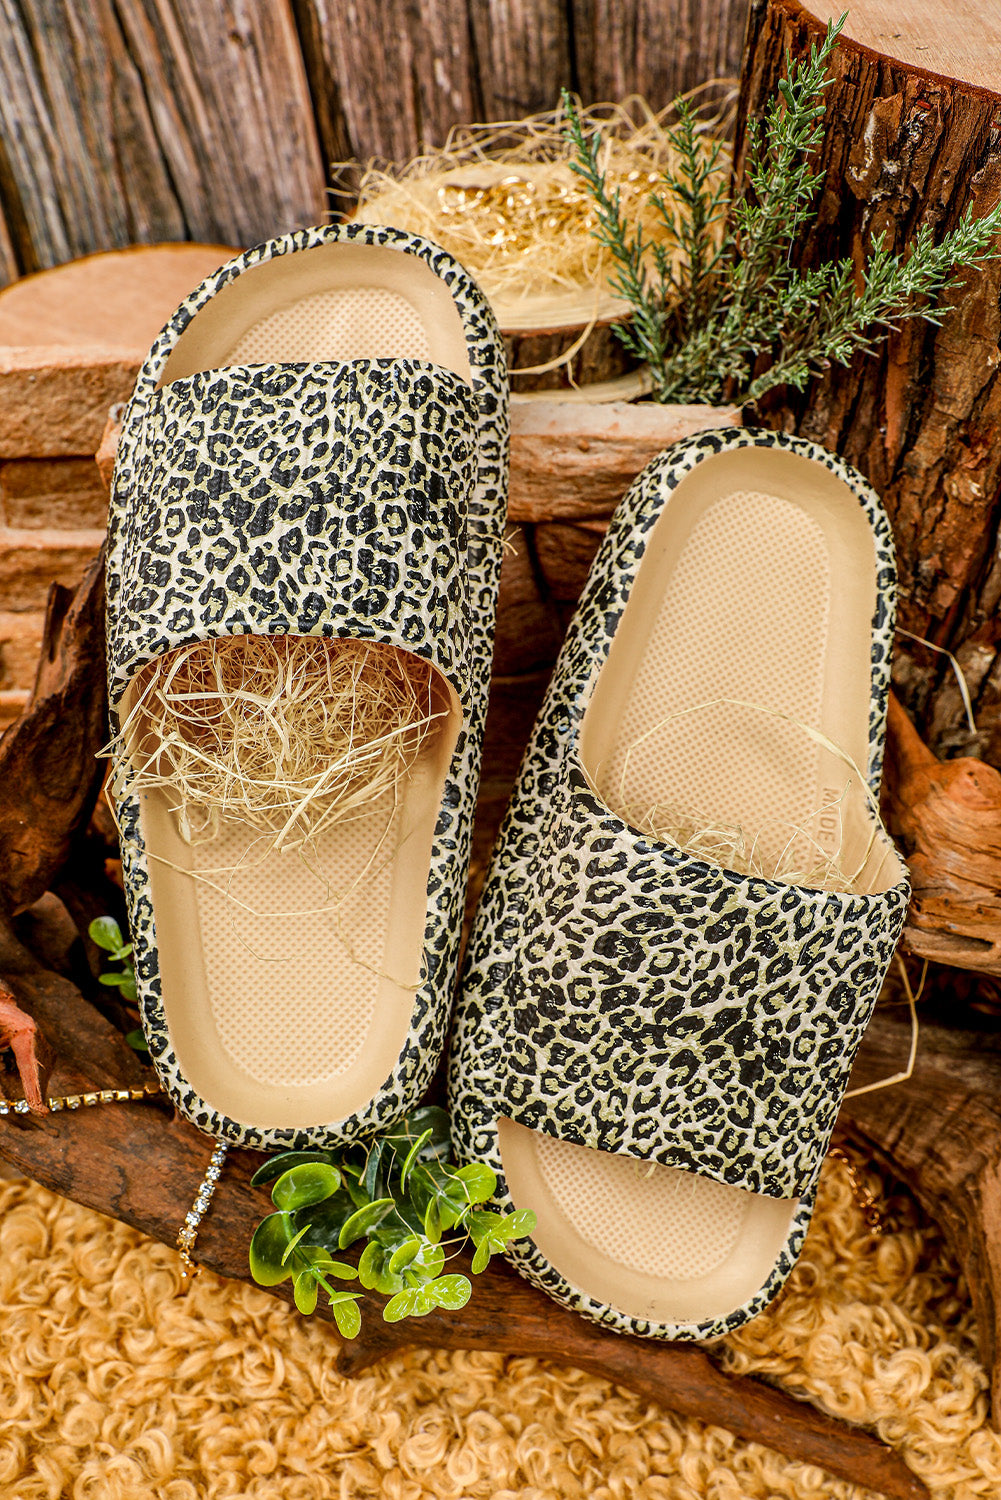 Leopard Soft Rubber Slippers